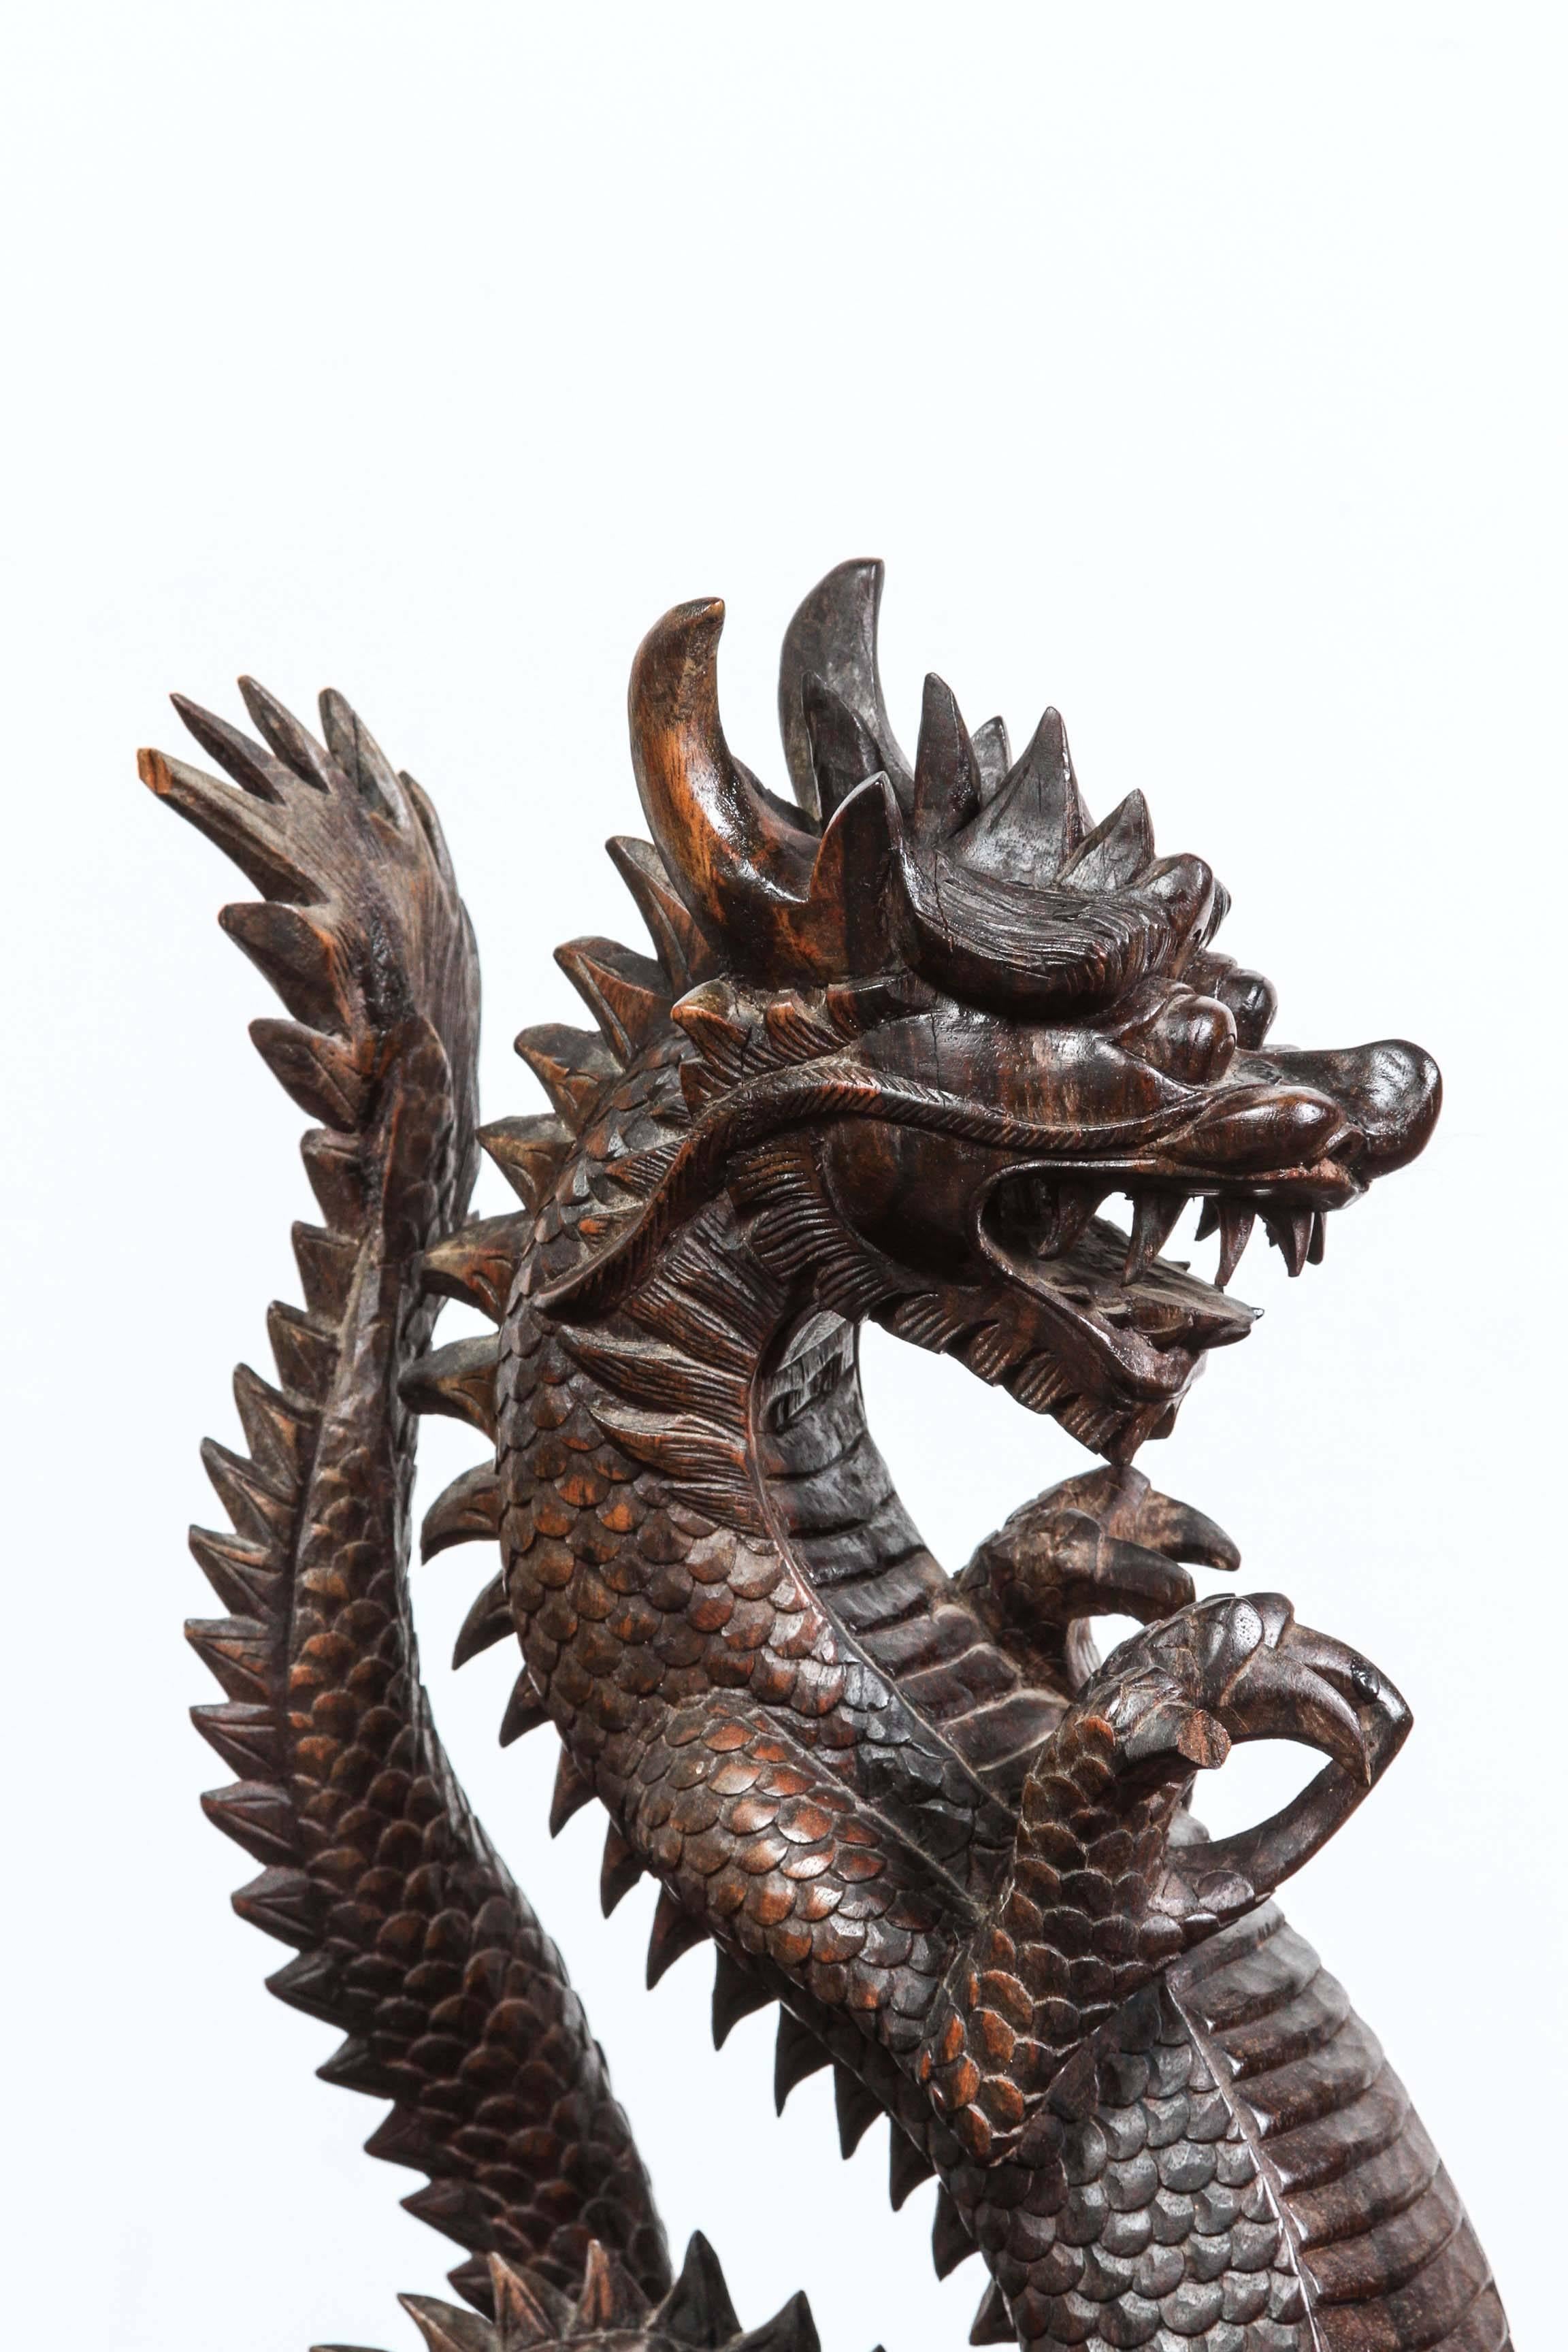 Wooden sculpture of a Roaring Chinese dragon.
Handcrafted with very fine details. 
The sign of Emperor, dragon is the most important symbol of power, leadership and prosperity in the Chinese culture. 
In Asia it is believed that displaying dragon